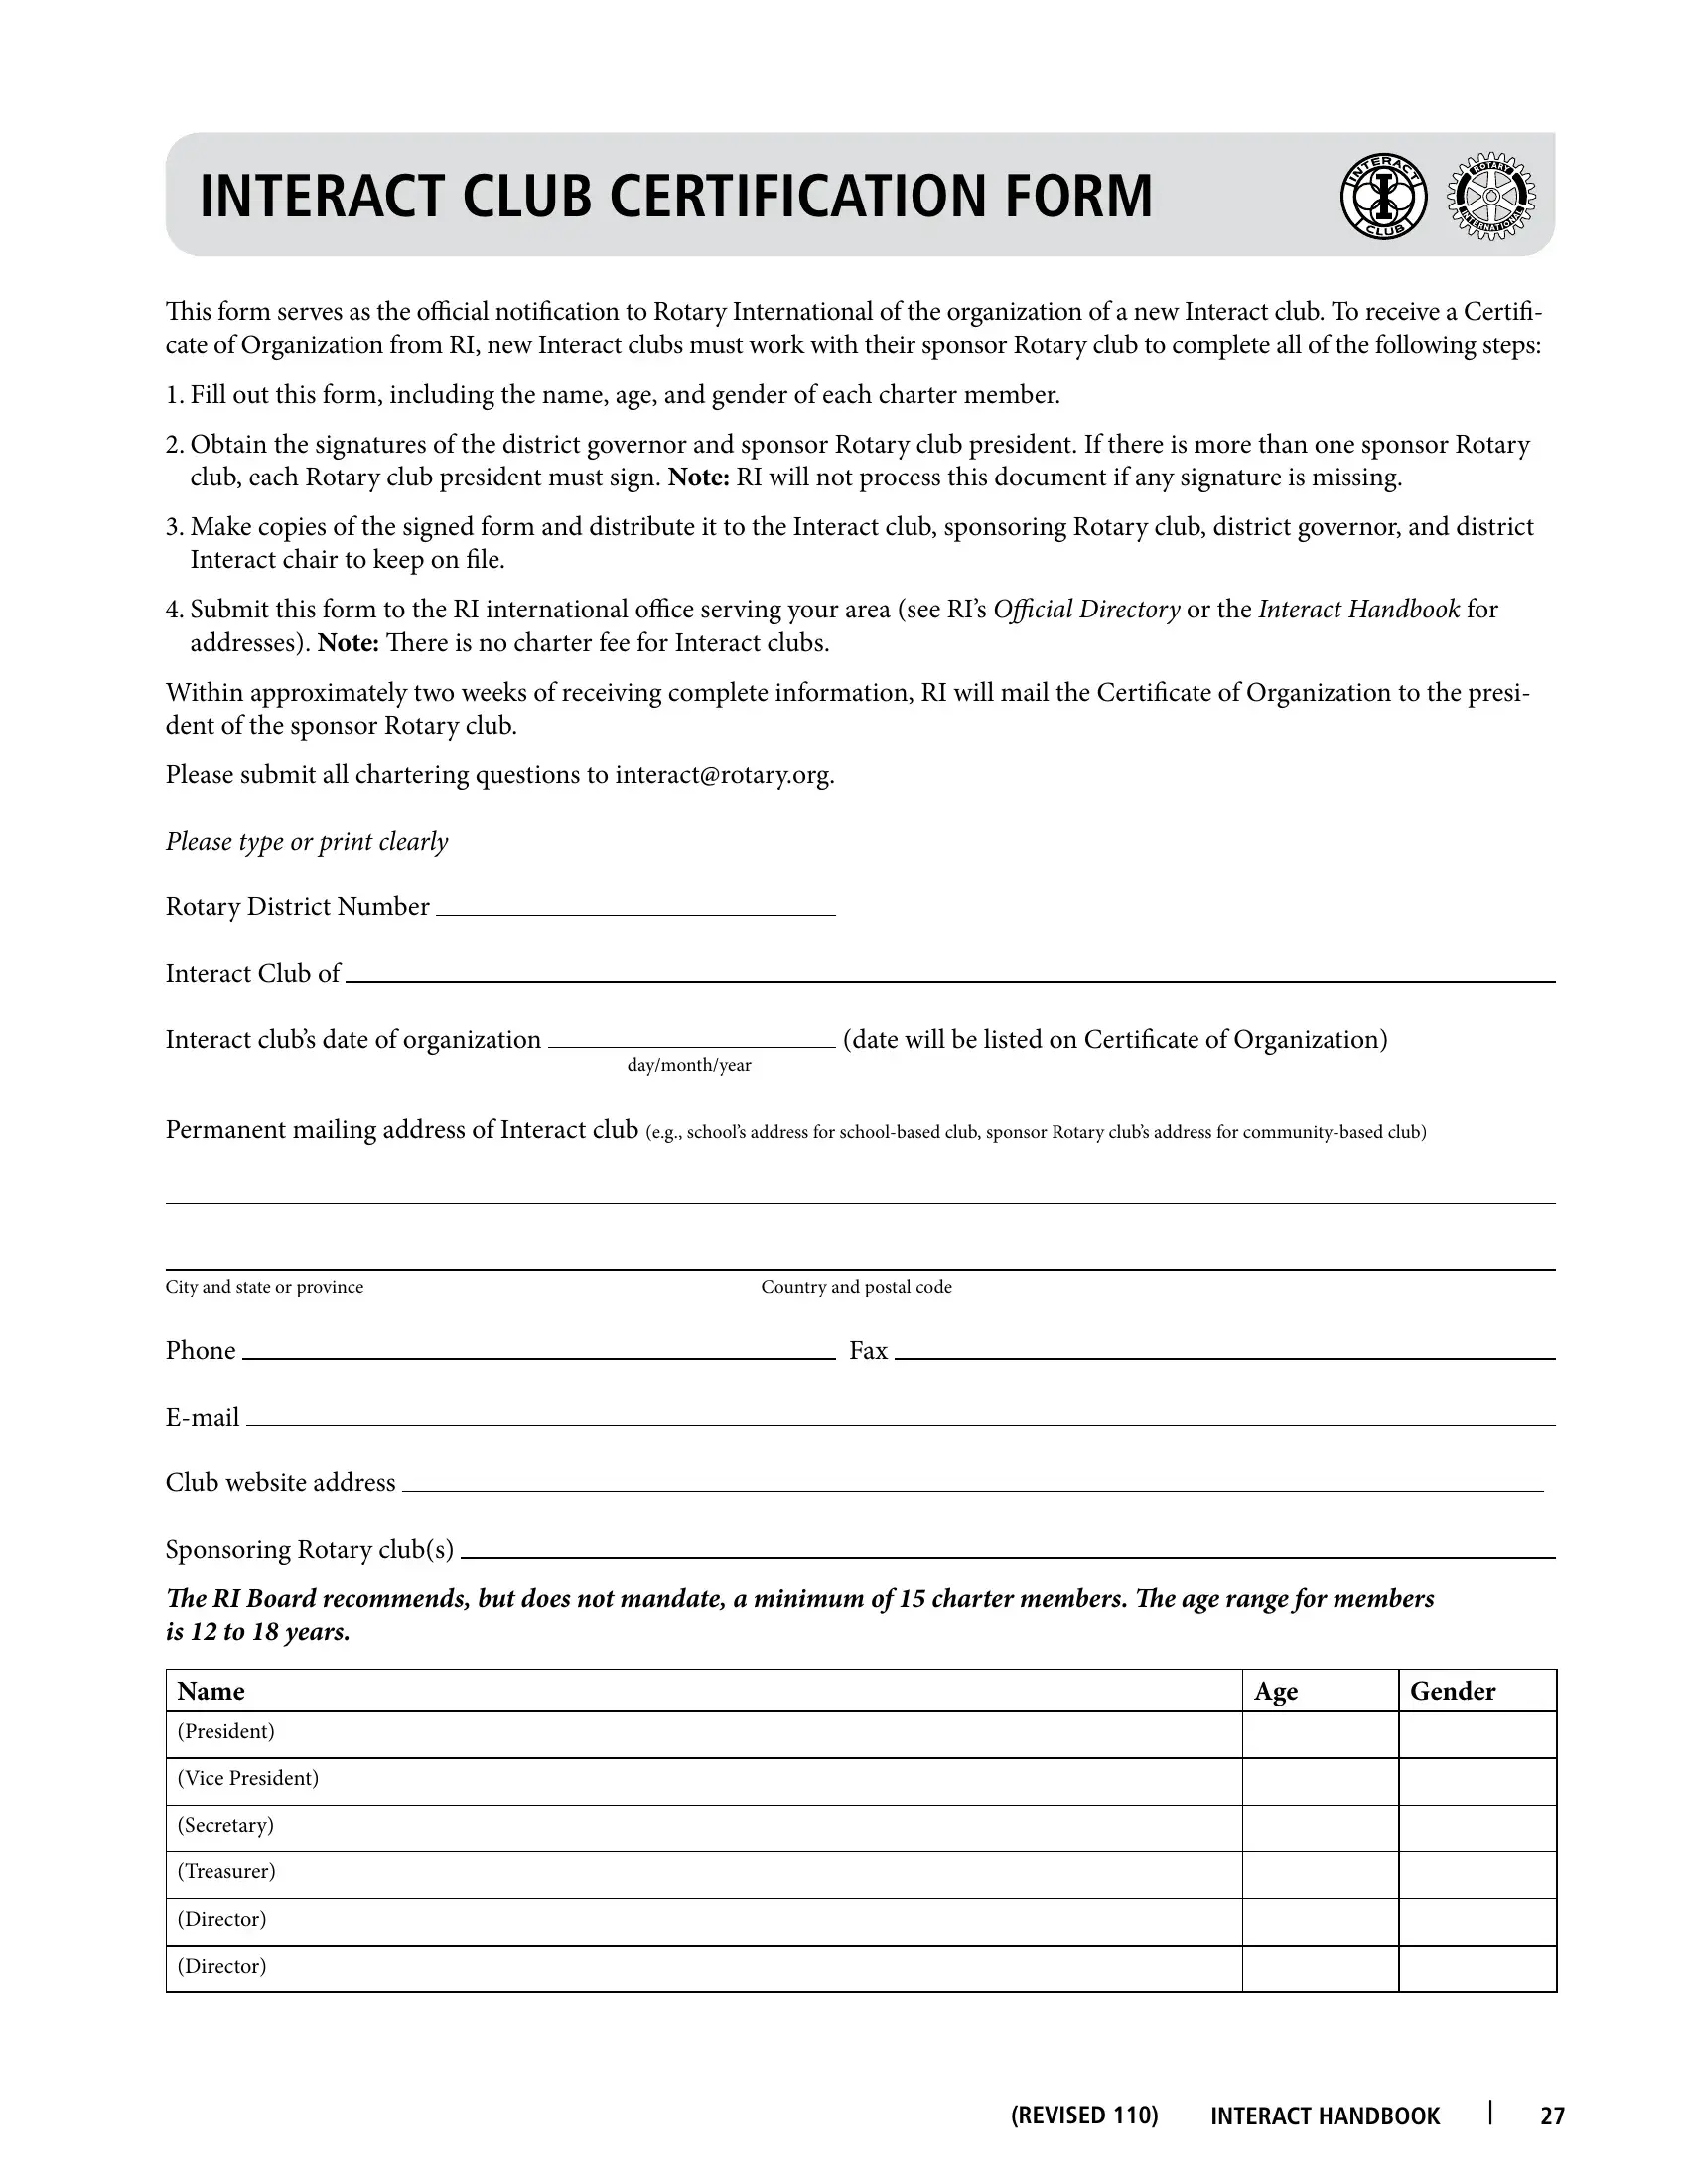 Interact Club Certification Form Preview